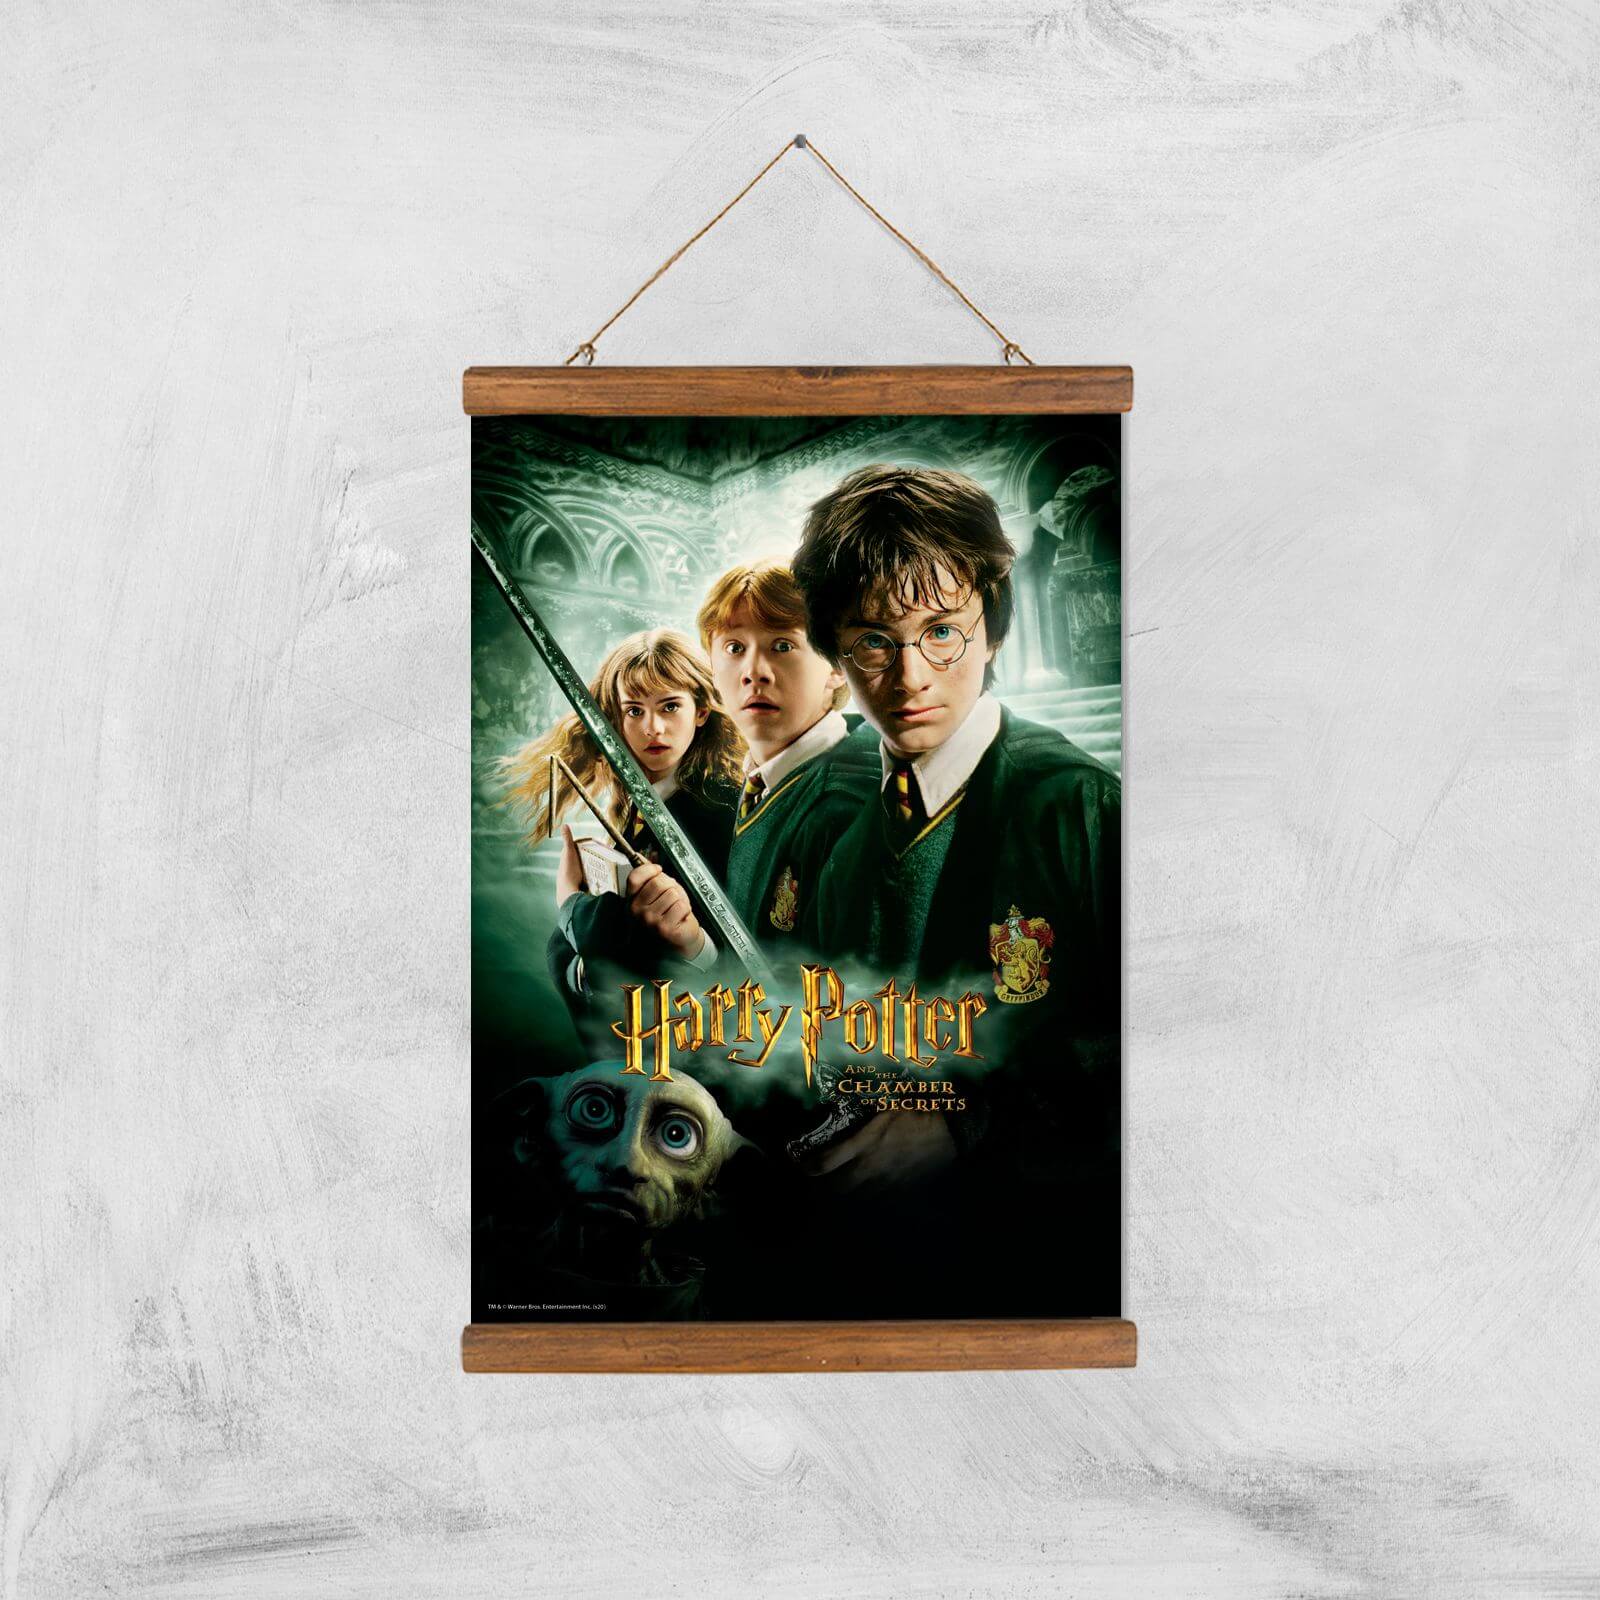 Harry Potter and the Chamber Of Secrets Giclee Art Print - A3 - Wooden Hanger